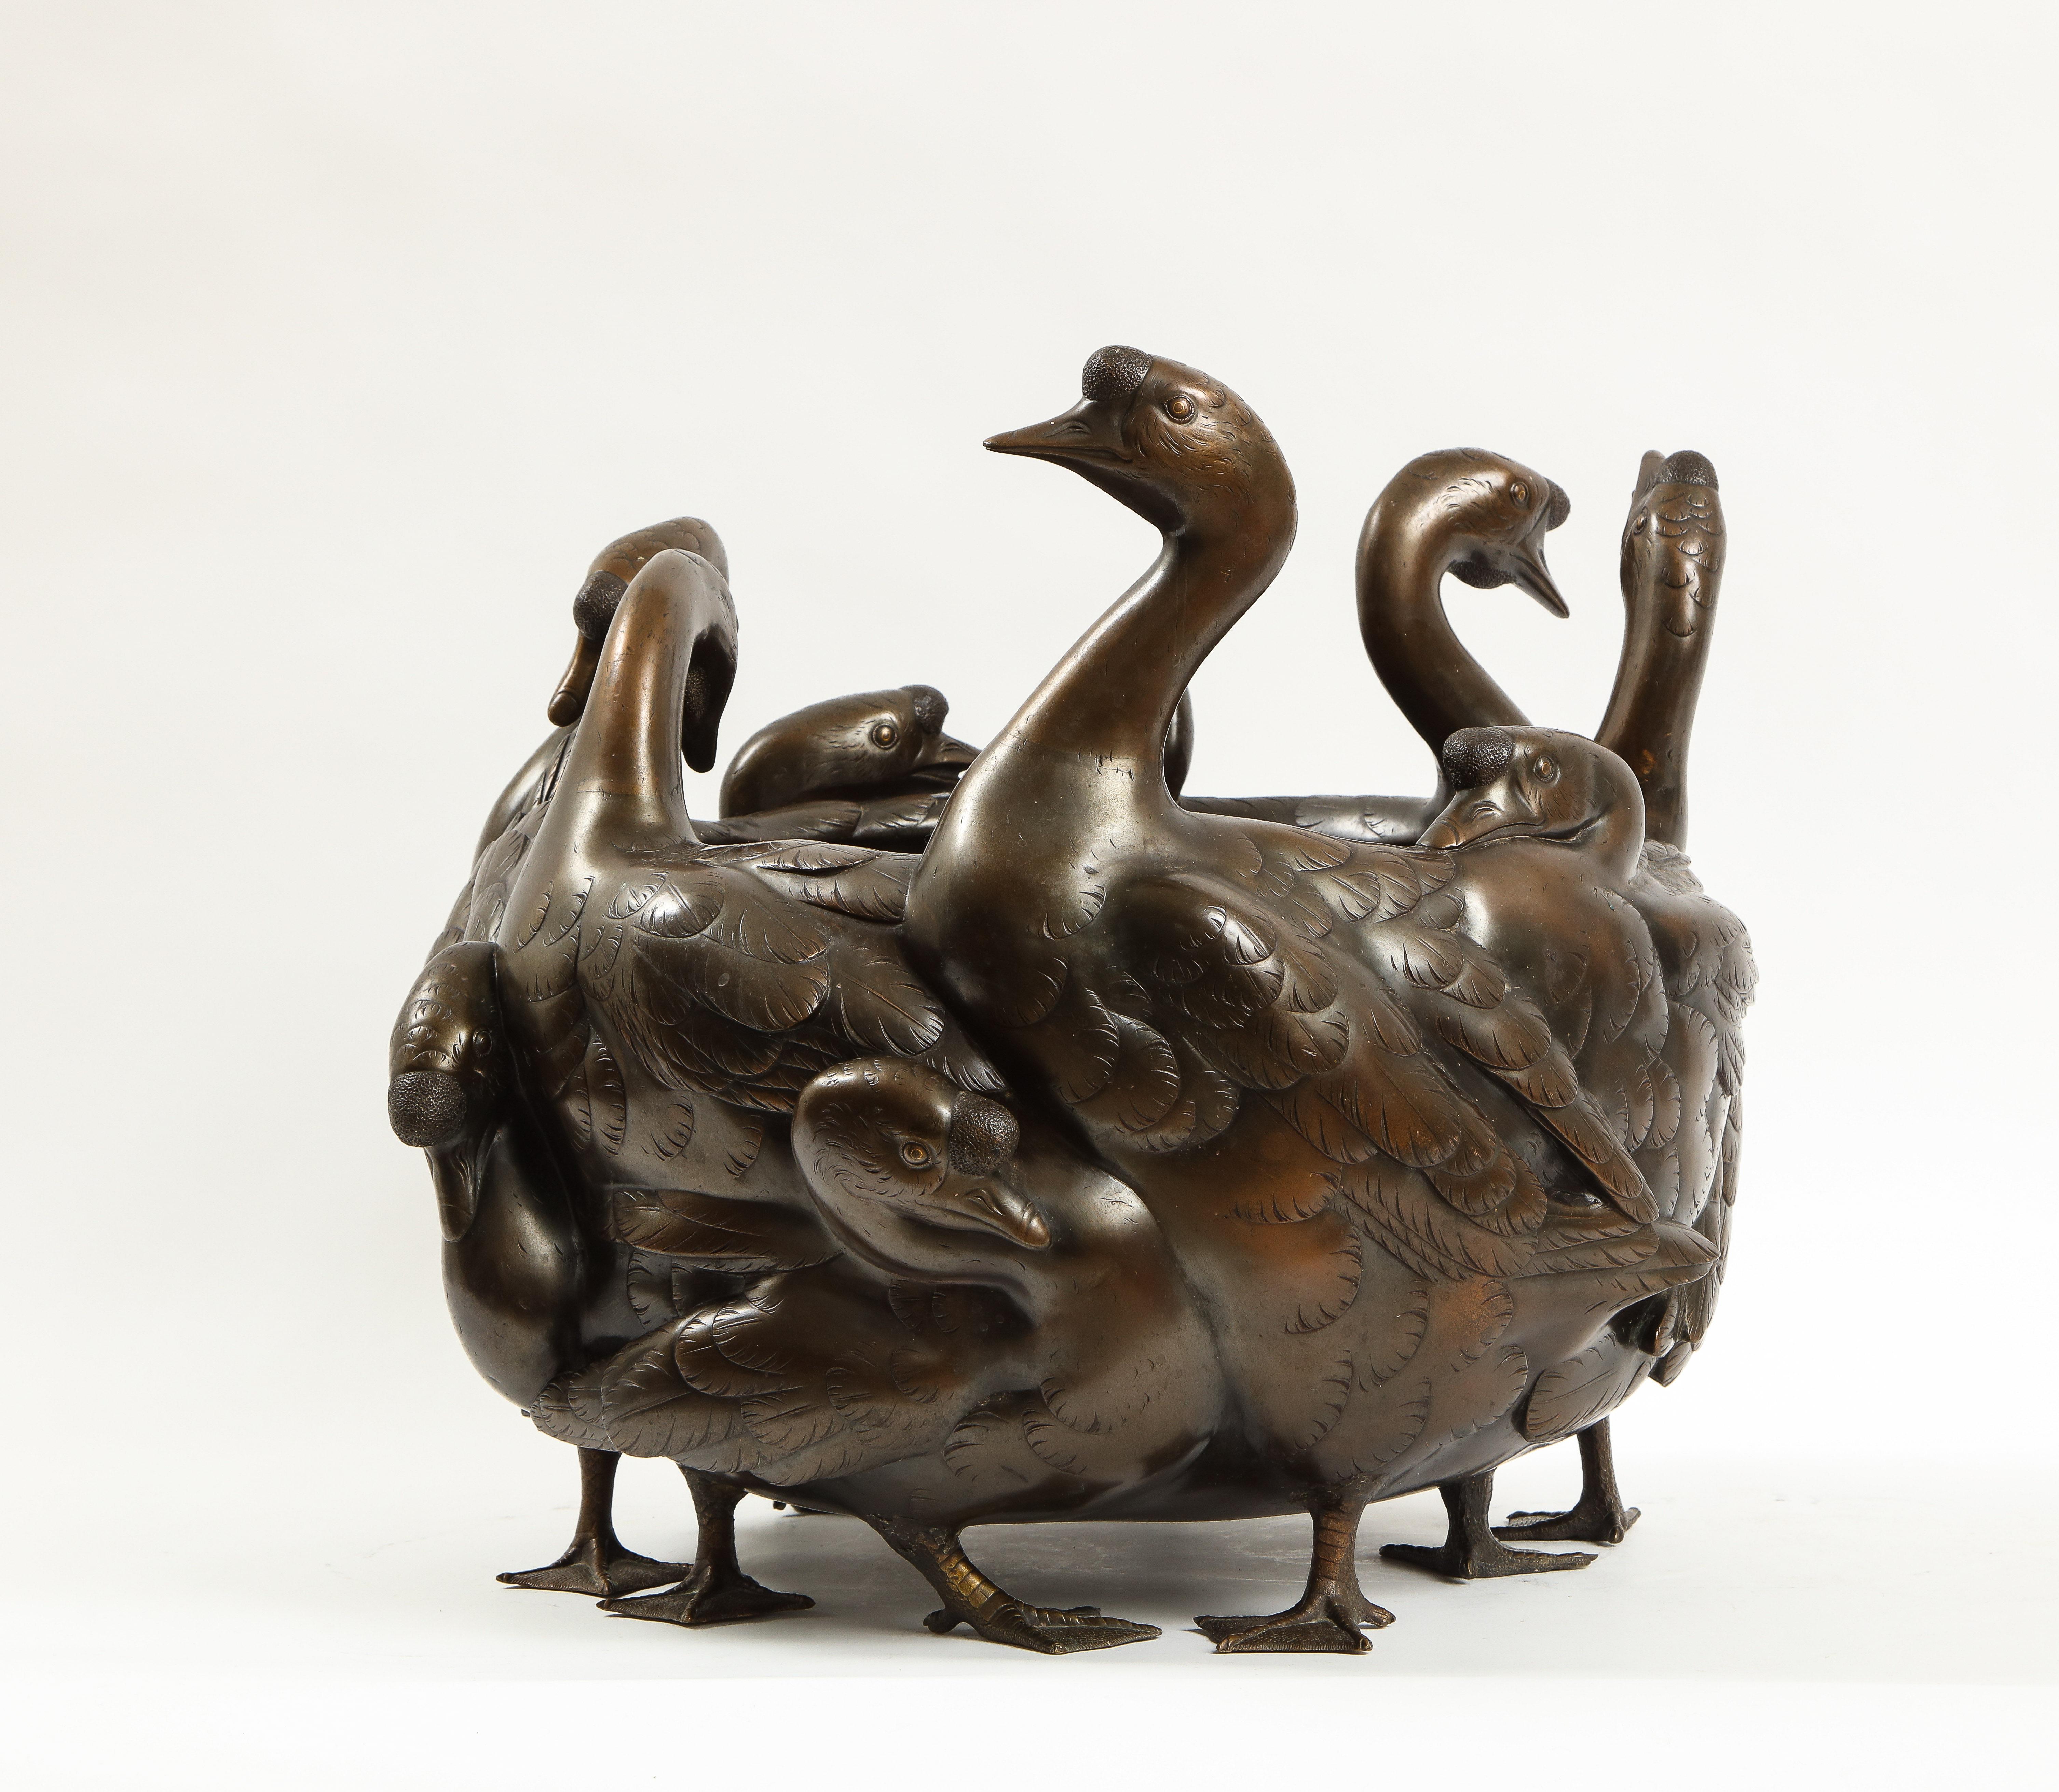 Meiji Period Rare Japanese Bronze Centerpiece of a Flock of Geese, Signed 1